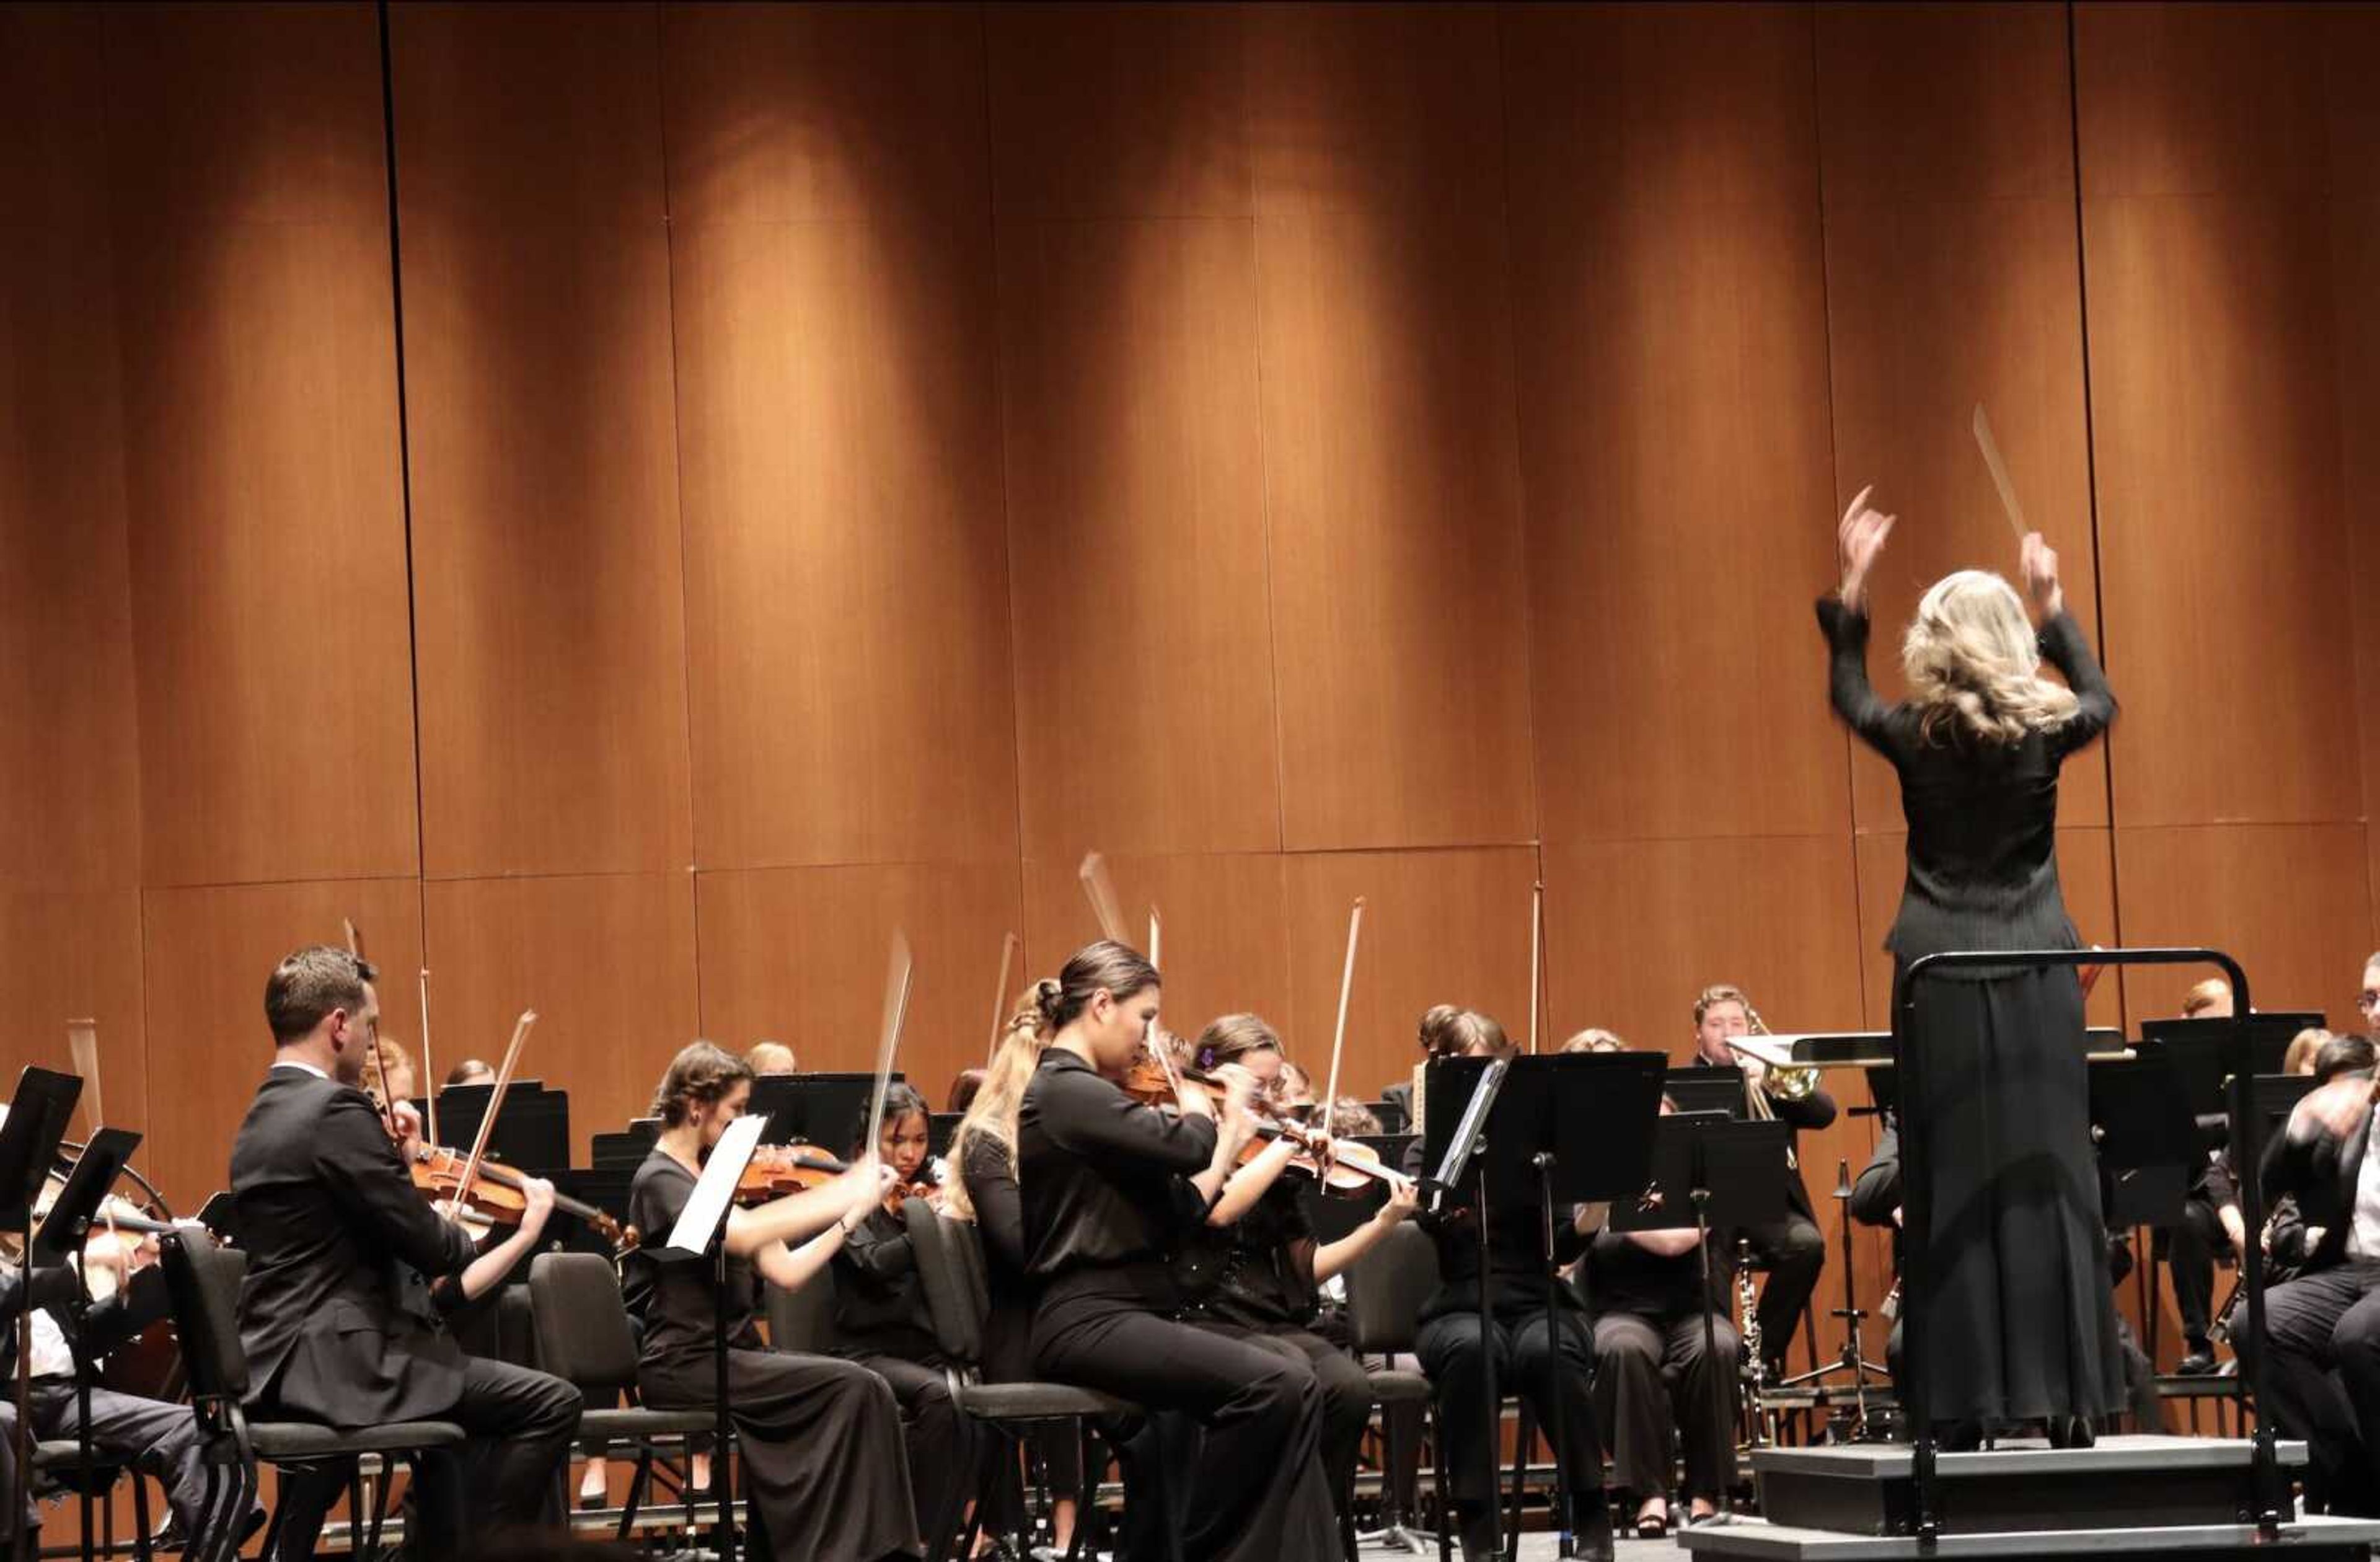 Sara Edgerton conducts the Southeast Missouri Symphony Orchestra's first performance of the year. The concert featured musical selections highlighting many different styles and cultures.